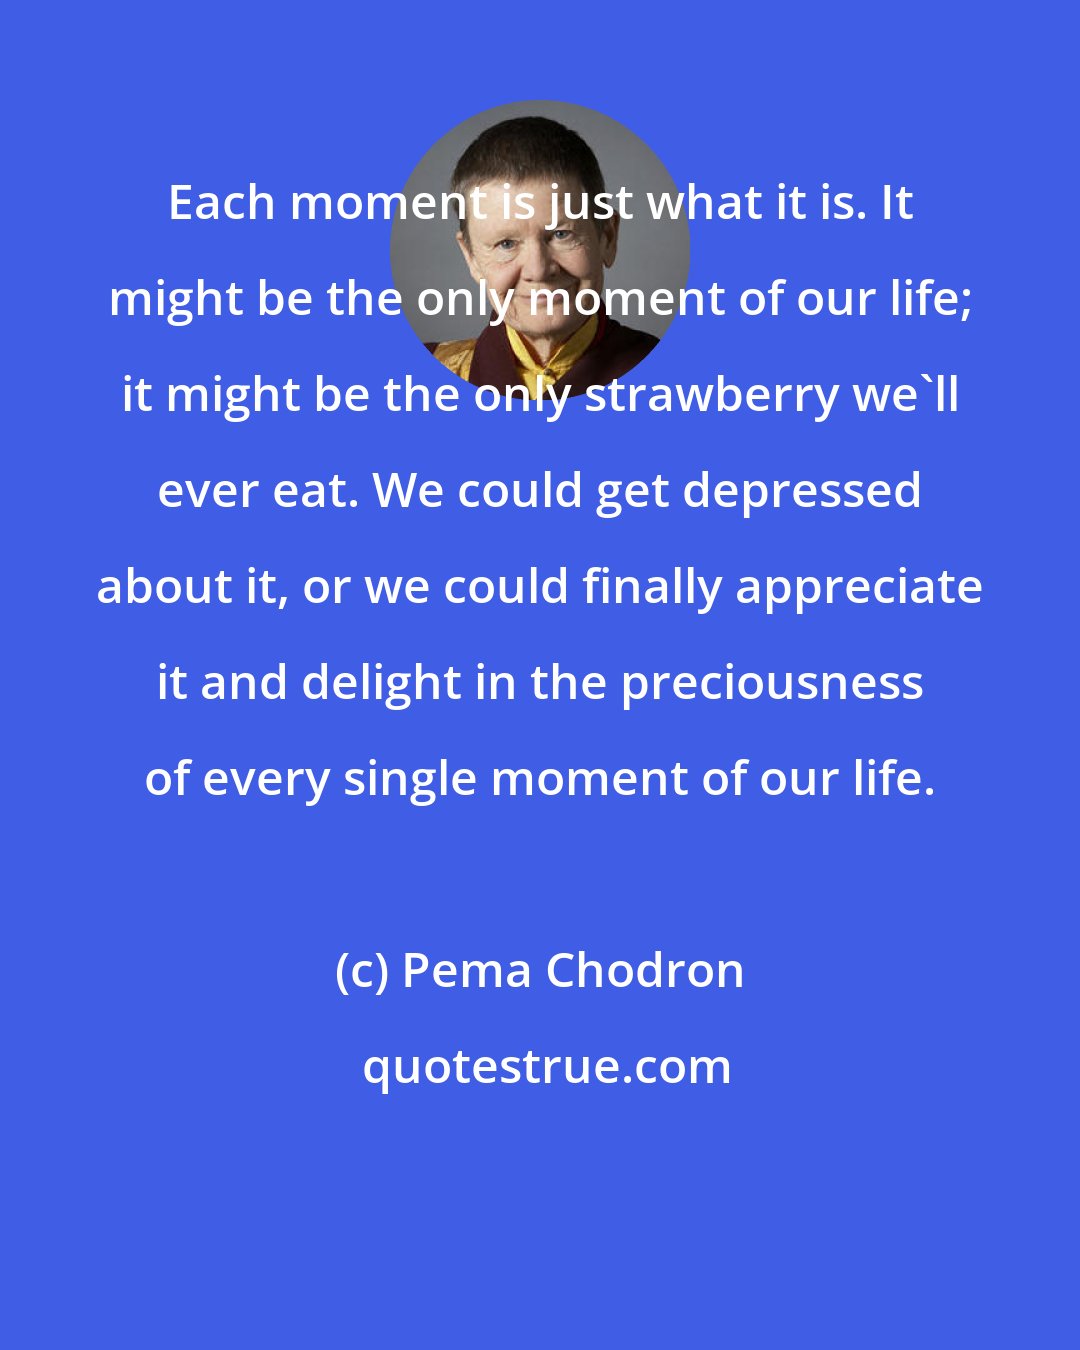 Pema Chodron: Each moment is just what it is. It might be the only moment of our life; it might be the only strawberry we'll ever eat. We could get depressed about it, or we could finally appreciate it and delight in the preciousness of every single moment of our life.